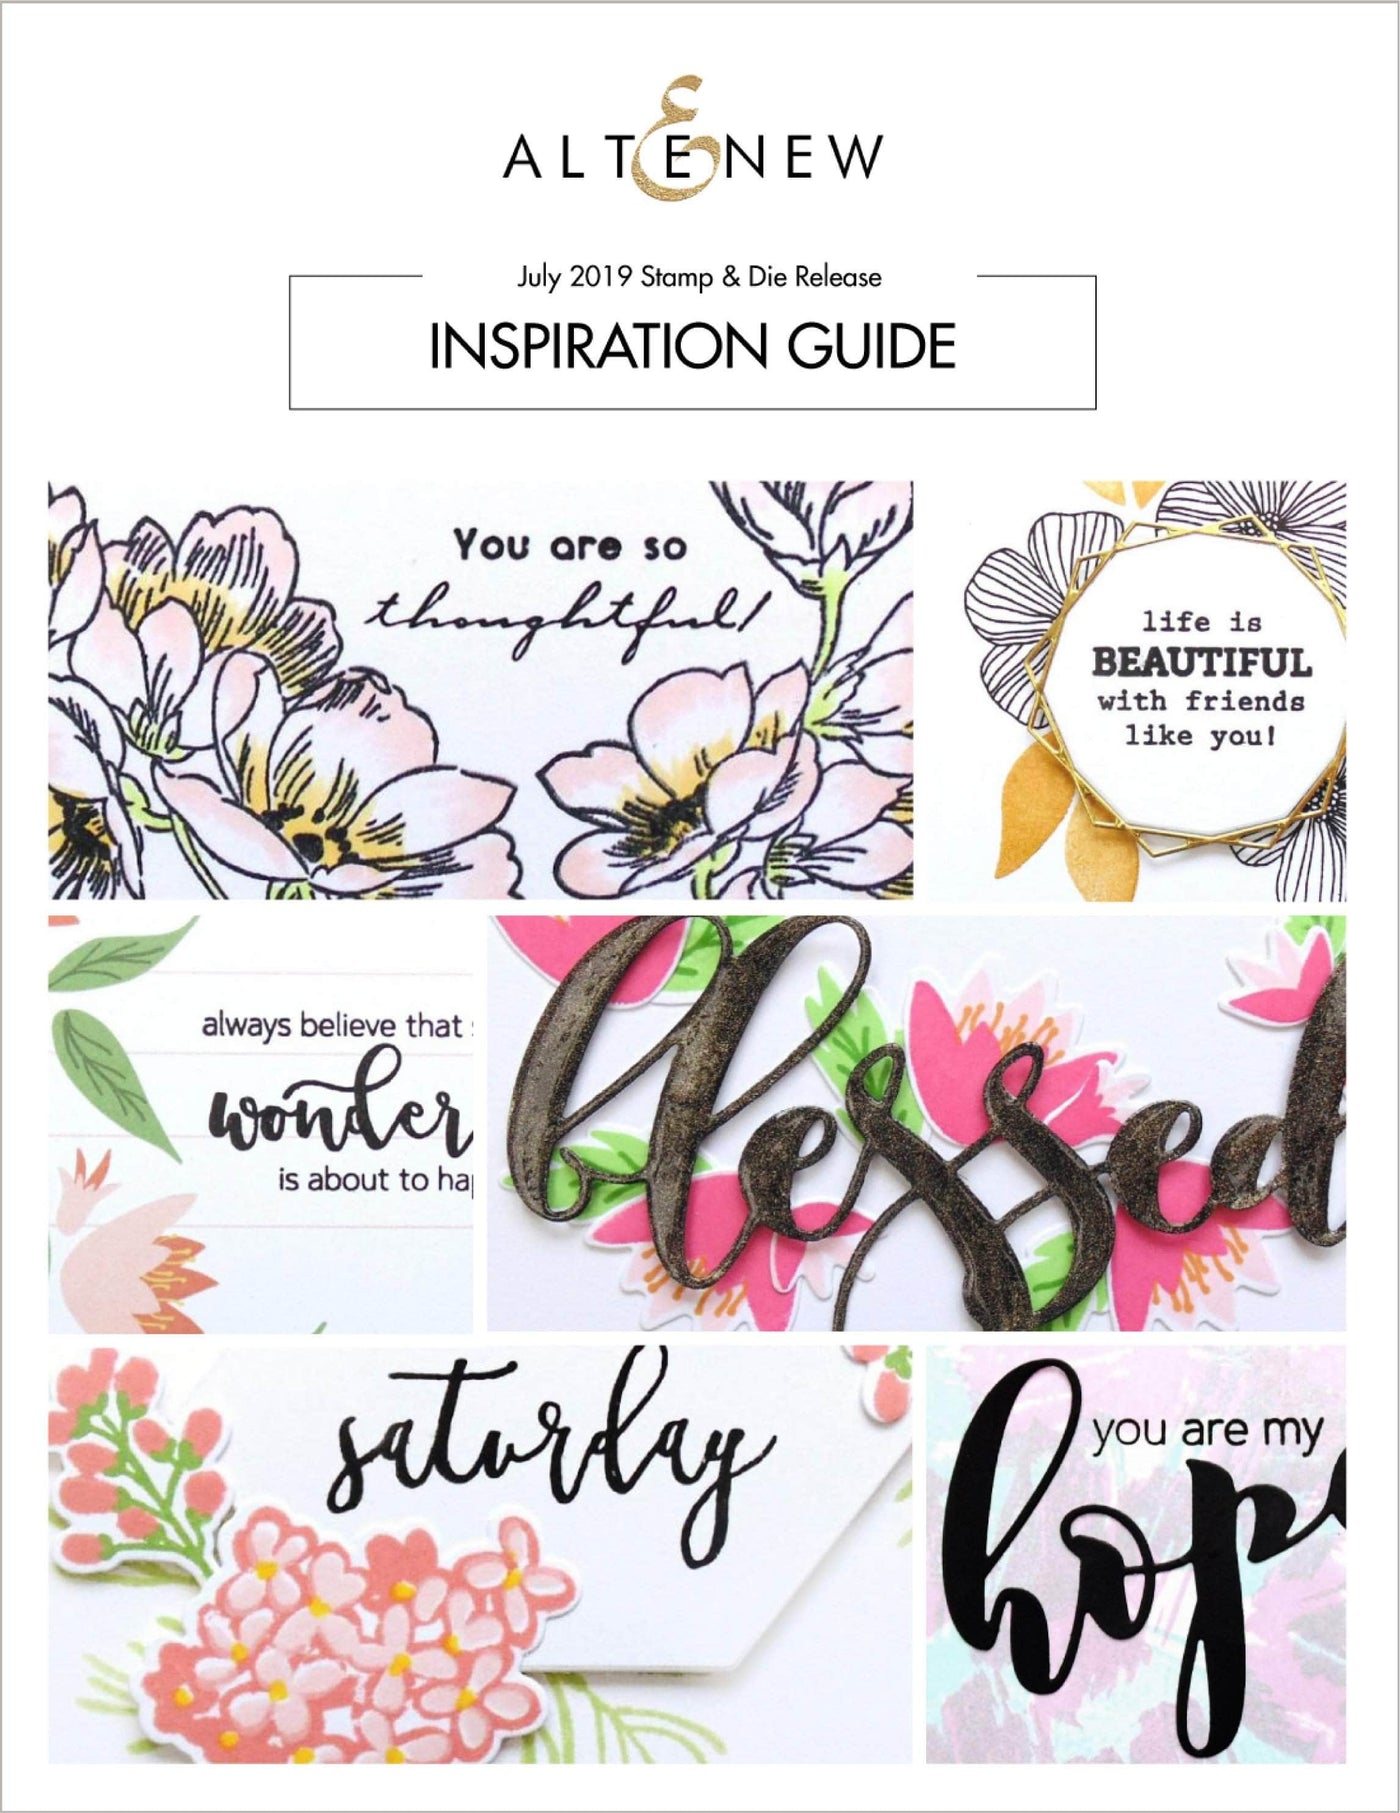 Printed Media Blessed With Hope Stamp & Die Release Inspiration Guide